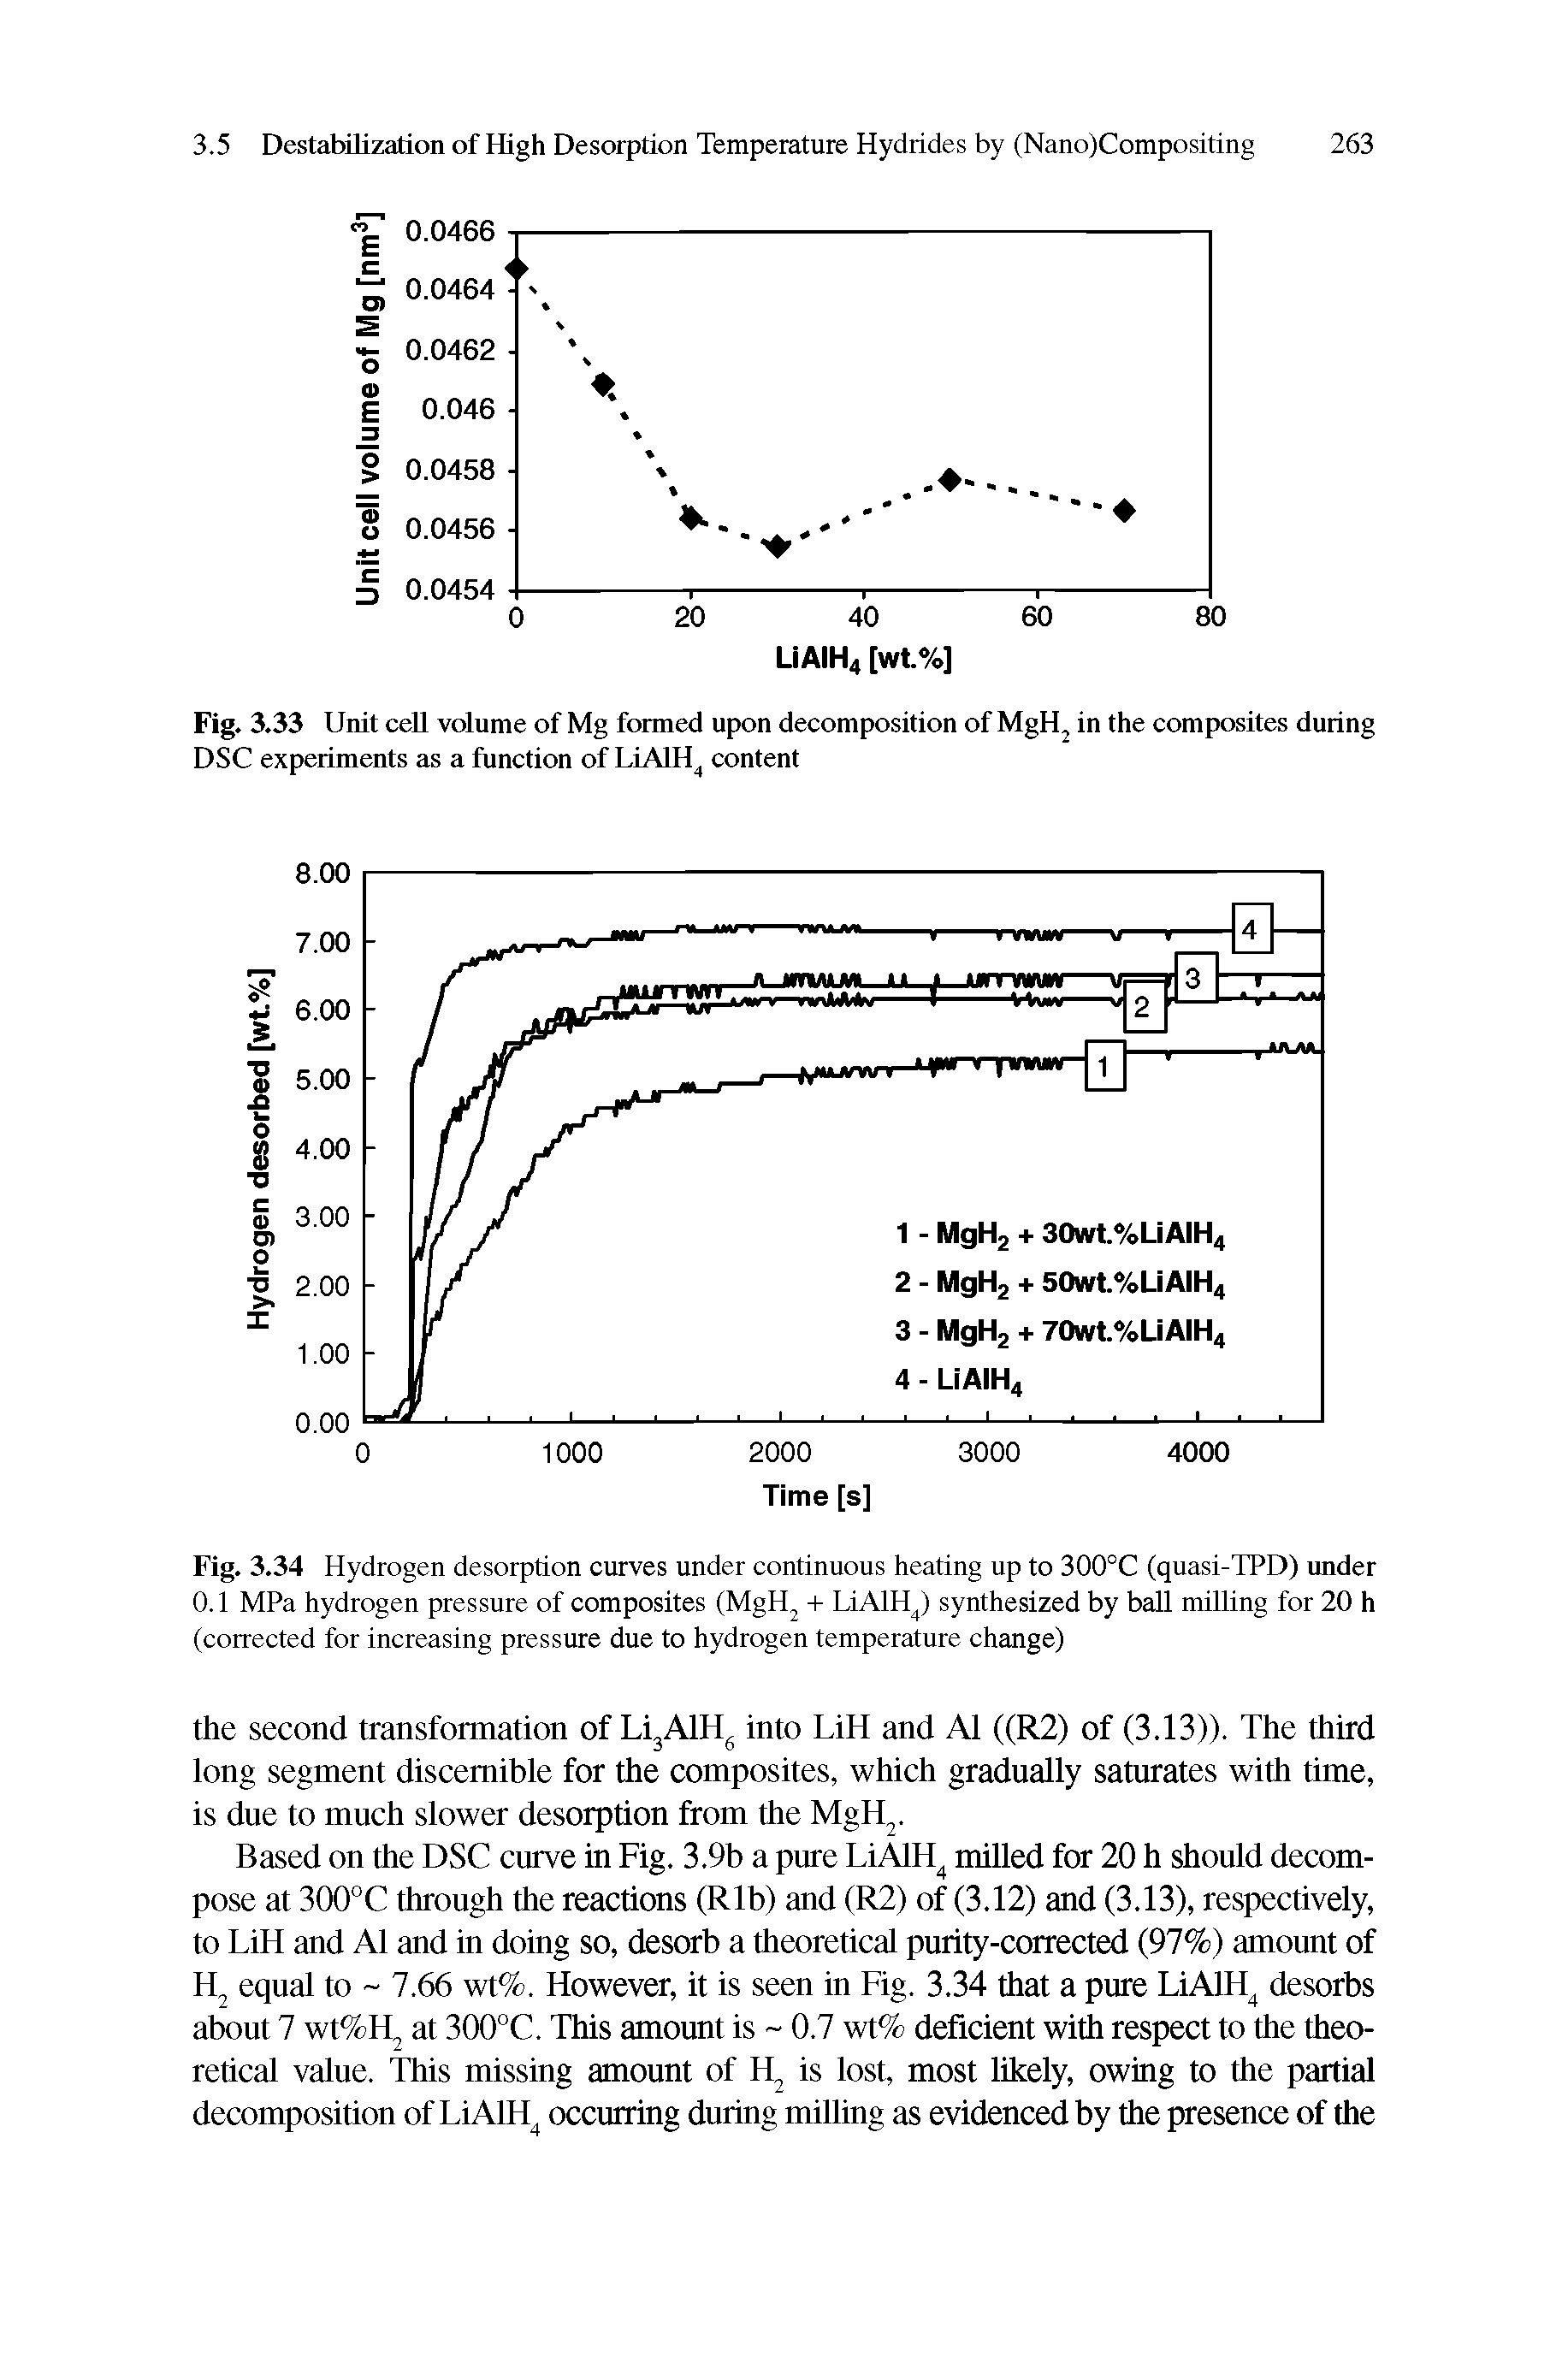 Fig. 3.34 Hydrogen desorption curves under continuous heating up to 300°C (quasi-TPD) imder 0.1 MPa hydrogen pressure of composites (MgH + LiAlH ) synthesized by ball milling for 20 h (corrected for increasing pressure due to hydrogen temperature change)...